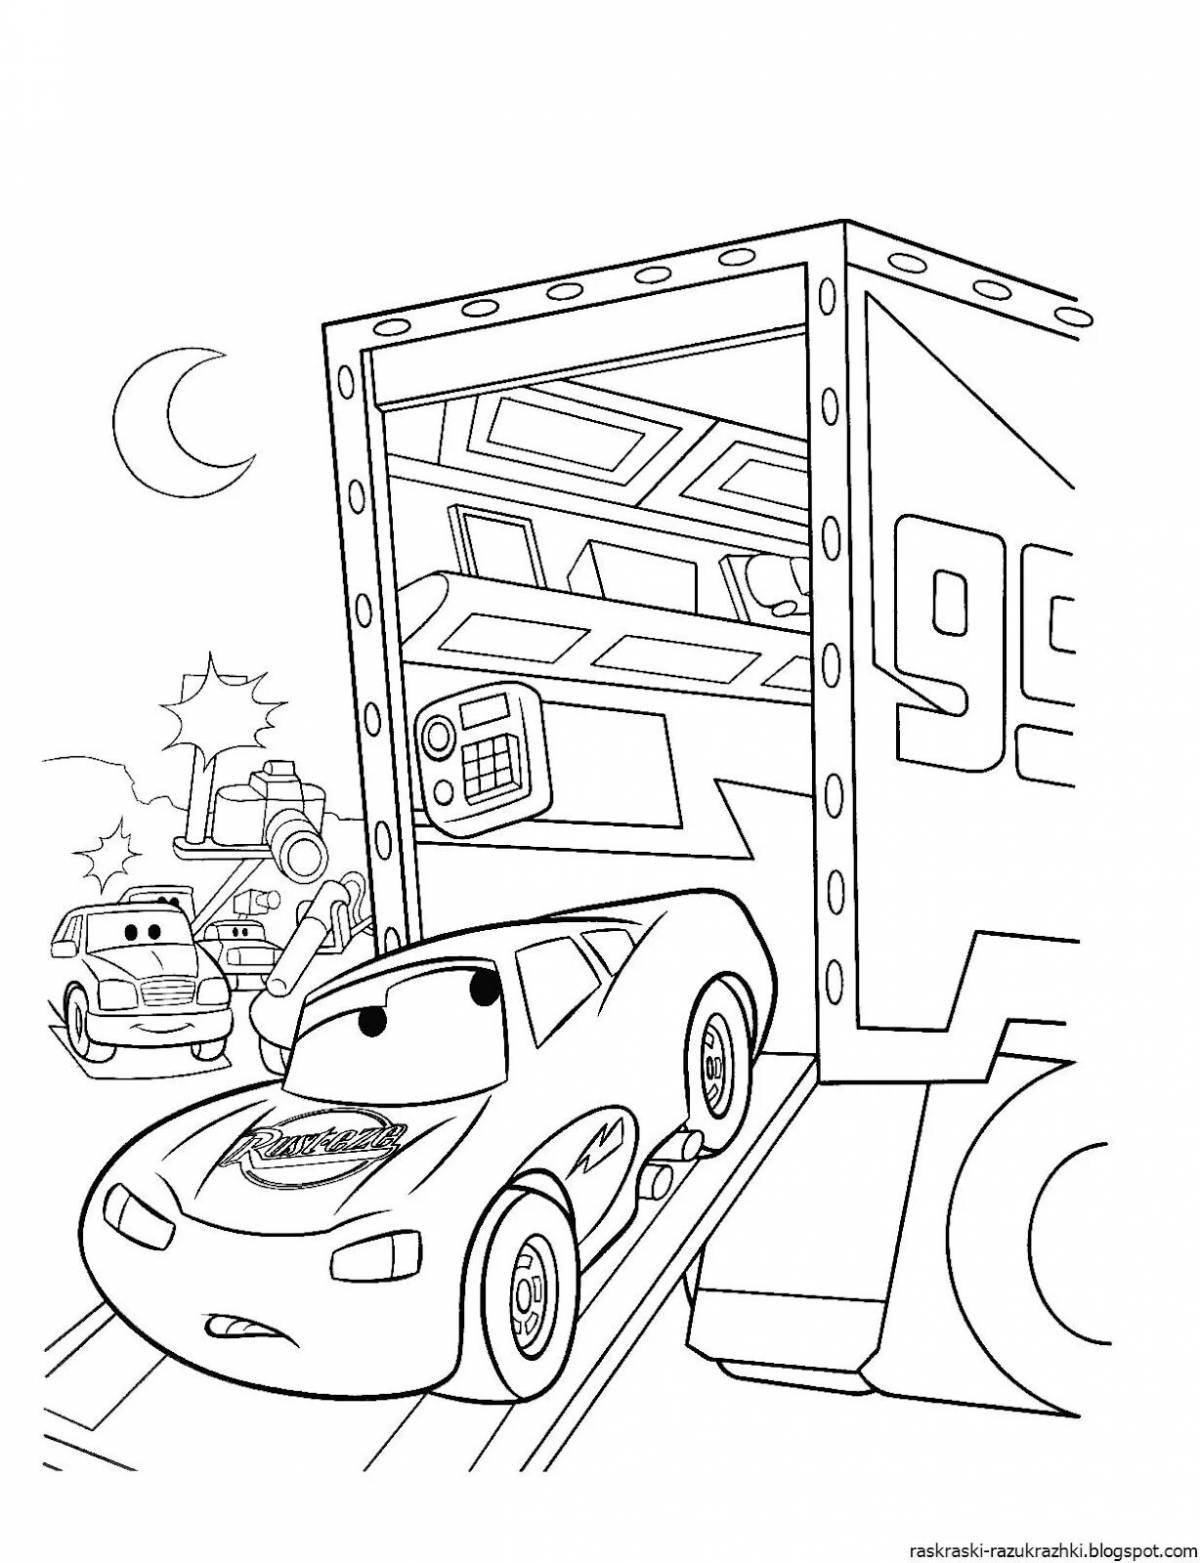 Coloring page funny parking